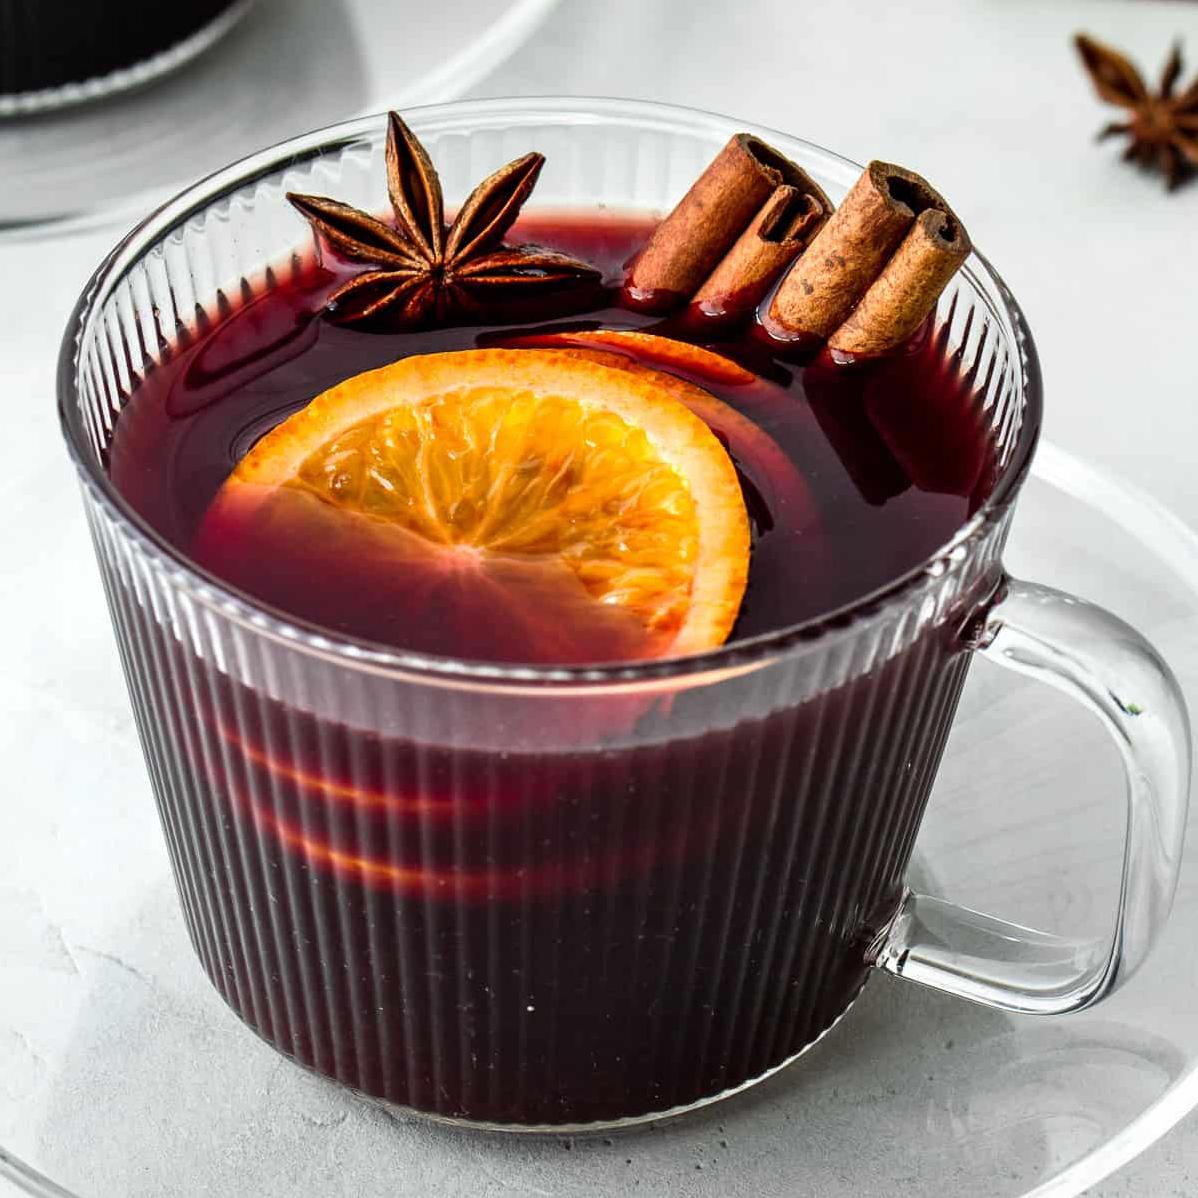  Intensify the mood of your holiday season with this spiced wine recipe.